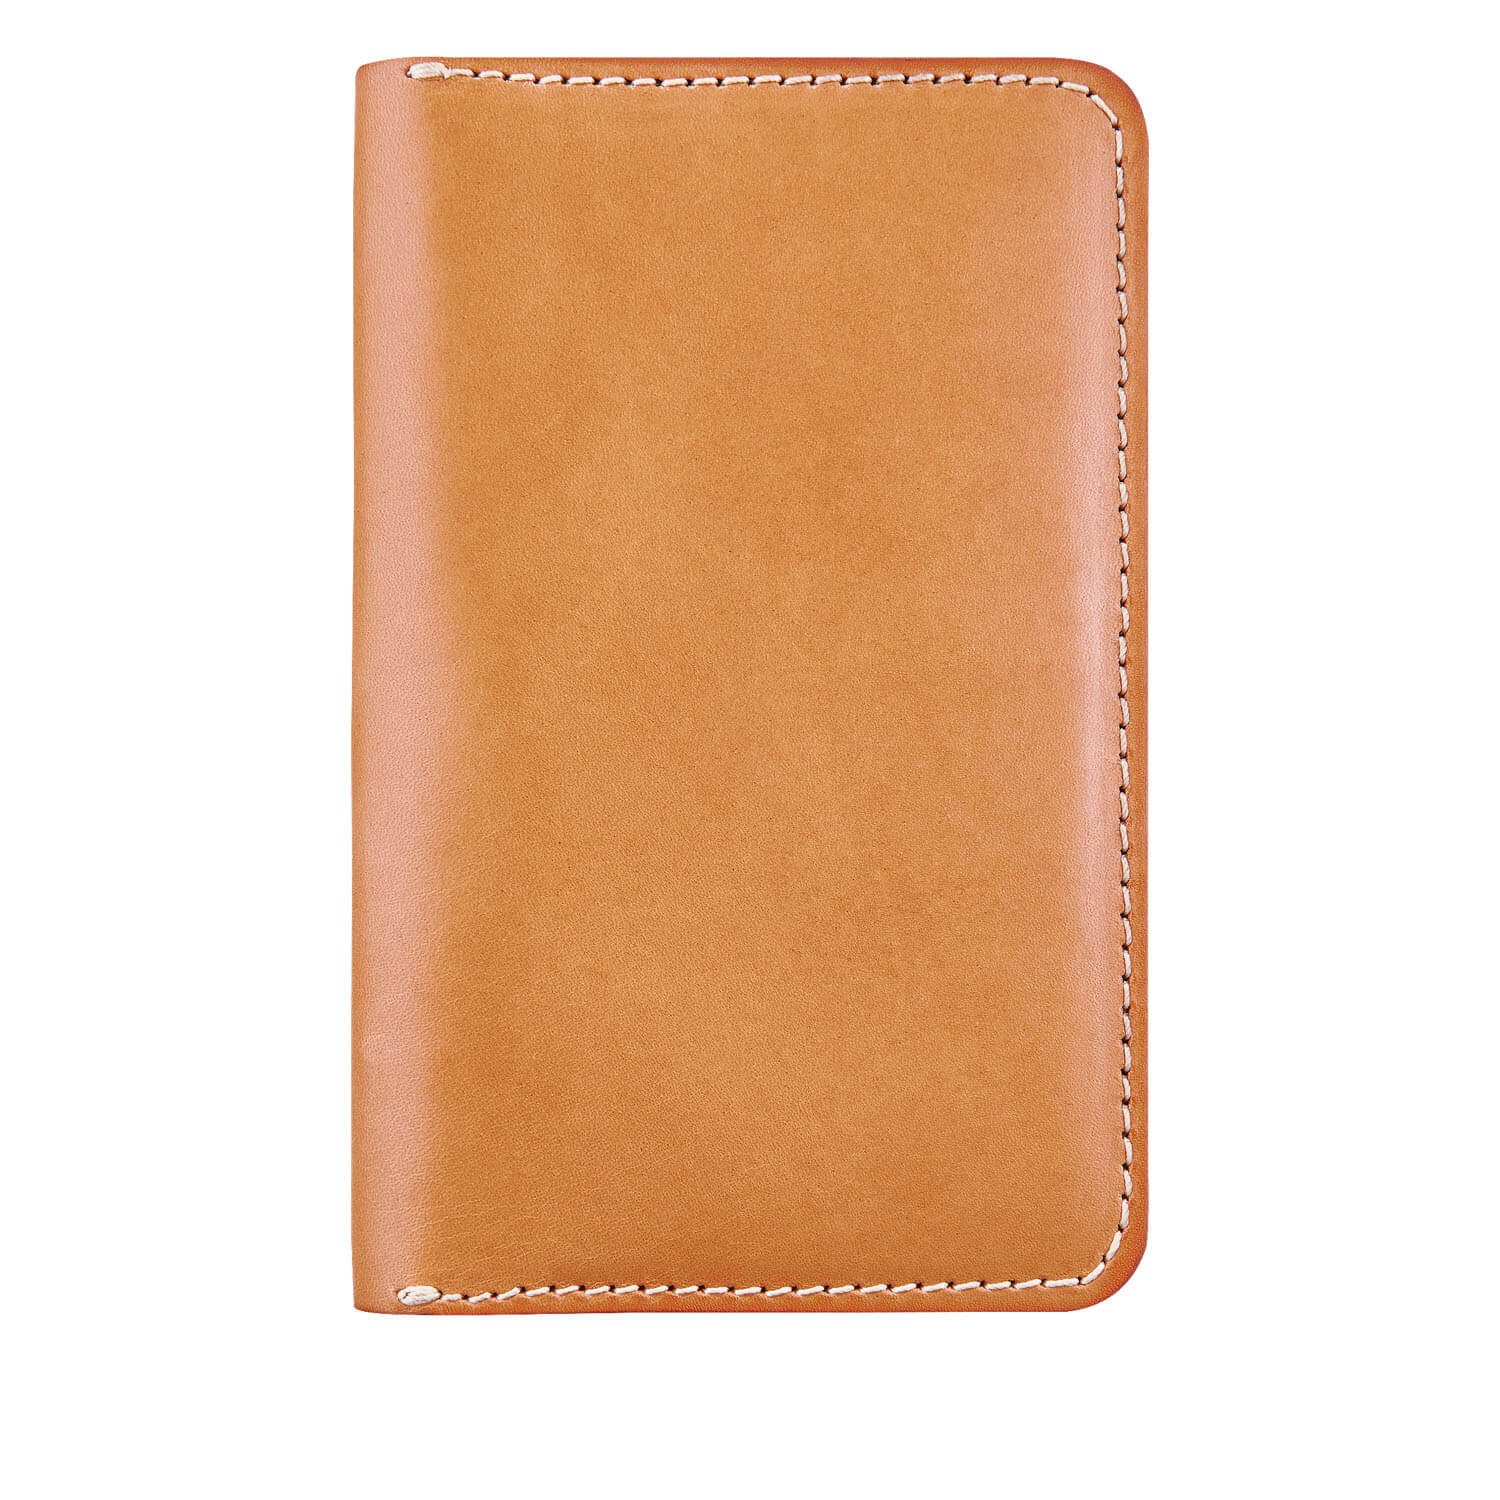 Russet Leather iPhone Full Cover Credit Card Case and Wallet. 